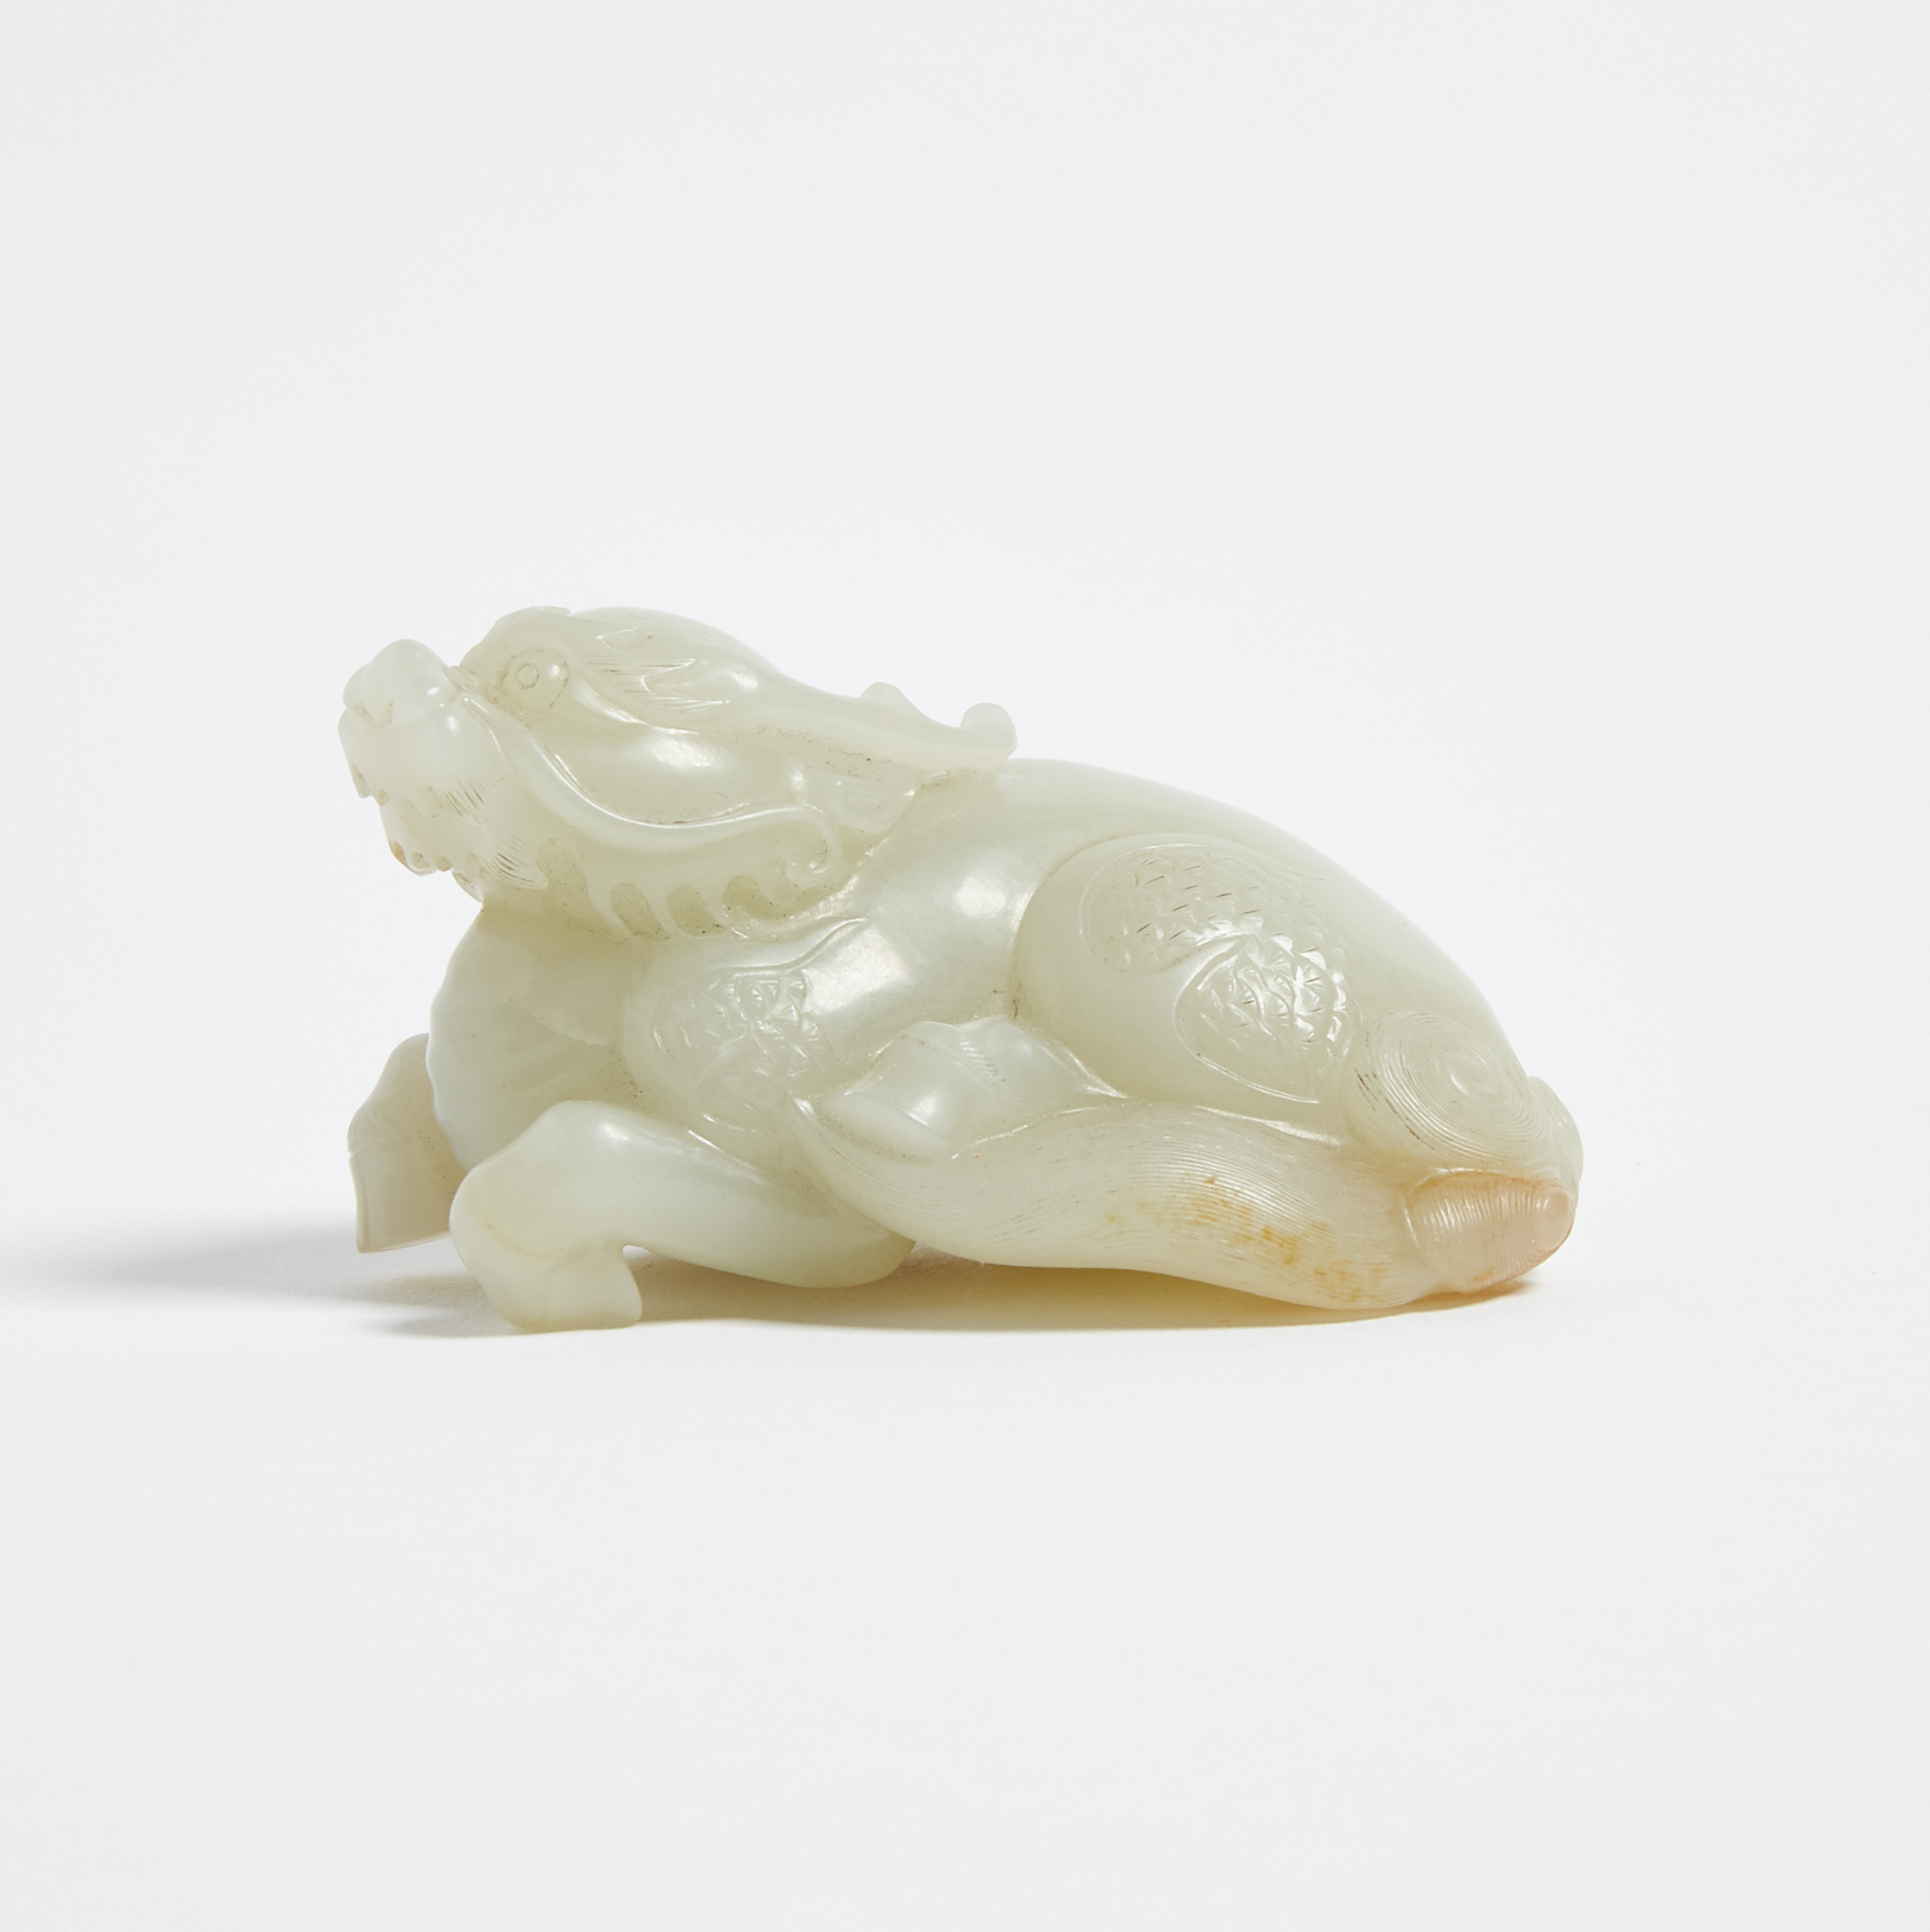 A White and Russet Jade Carved Qilin